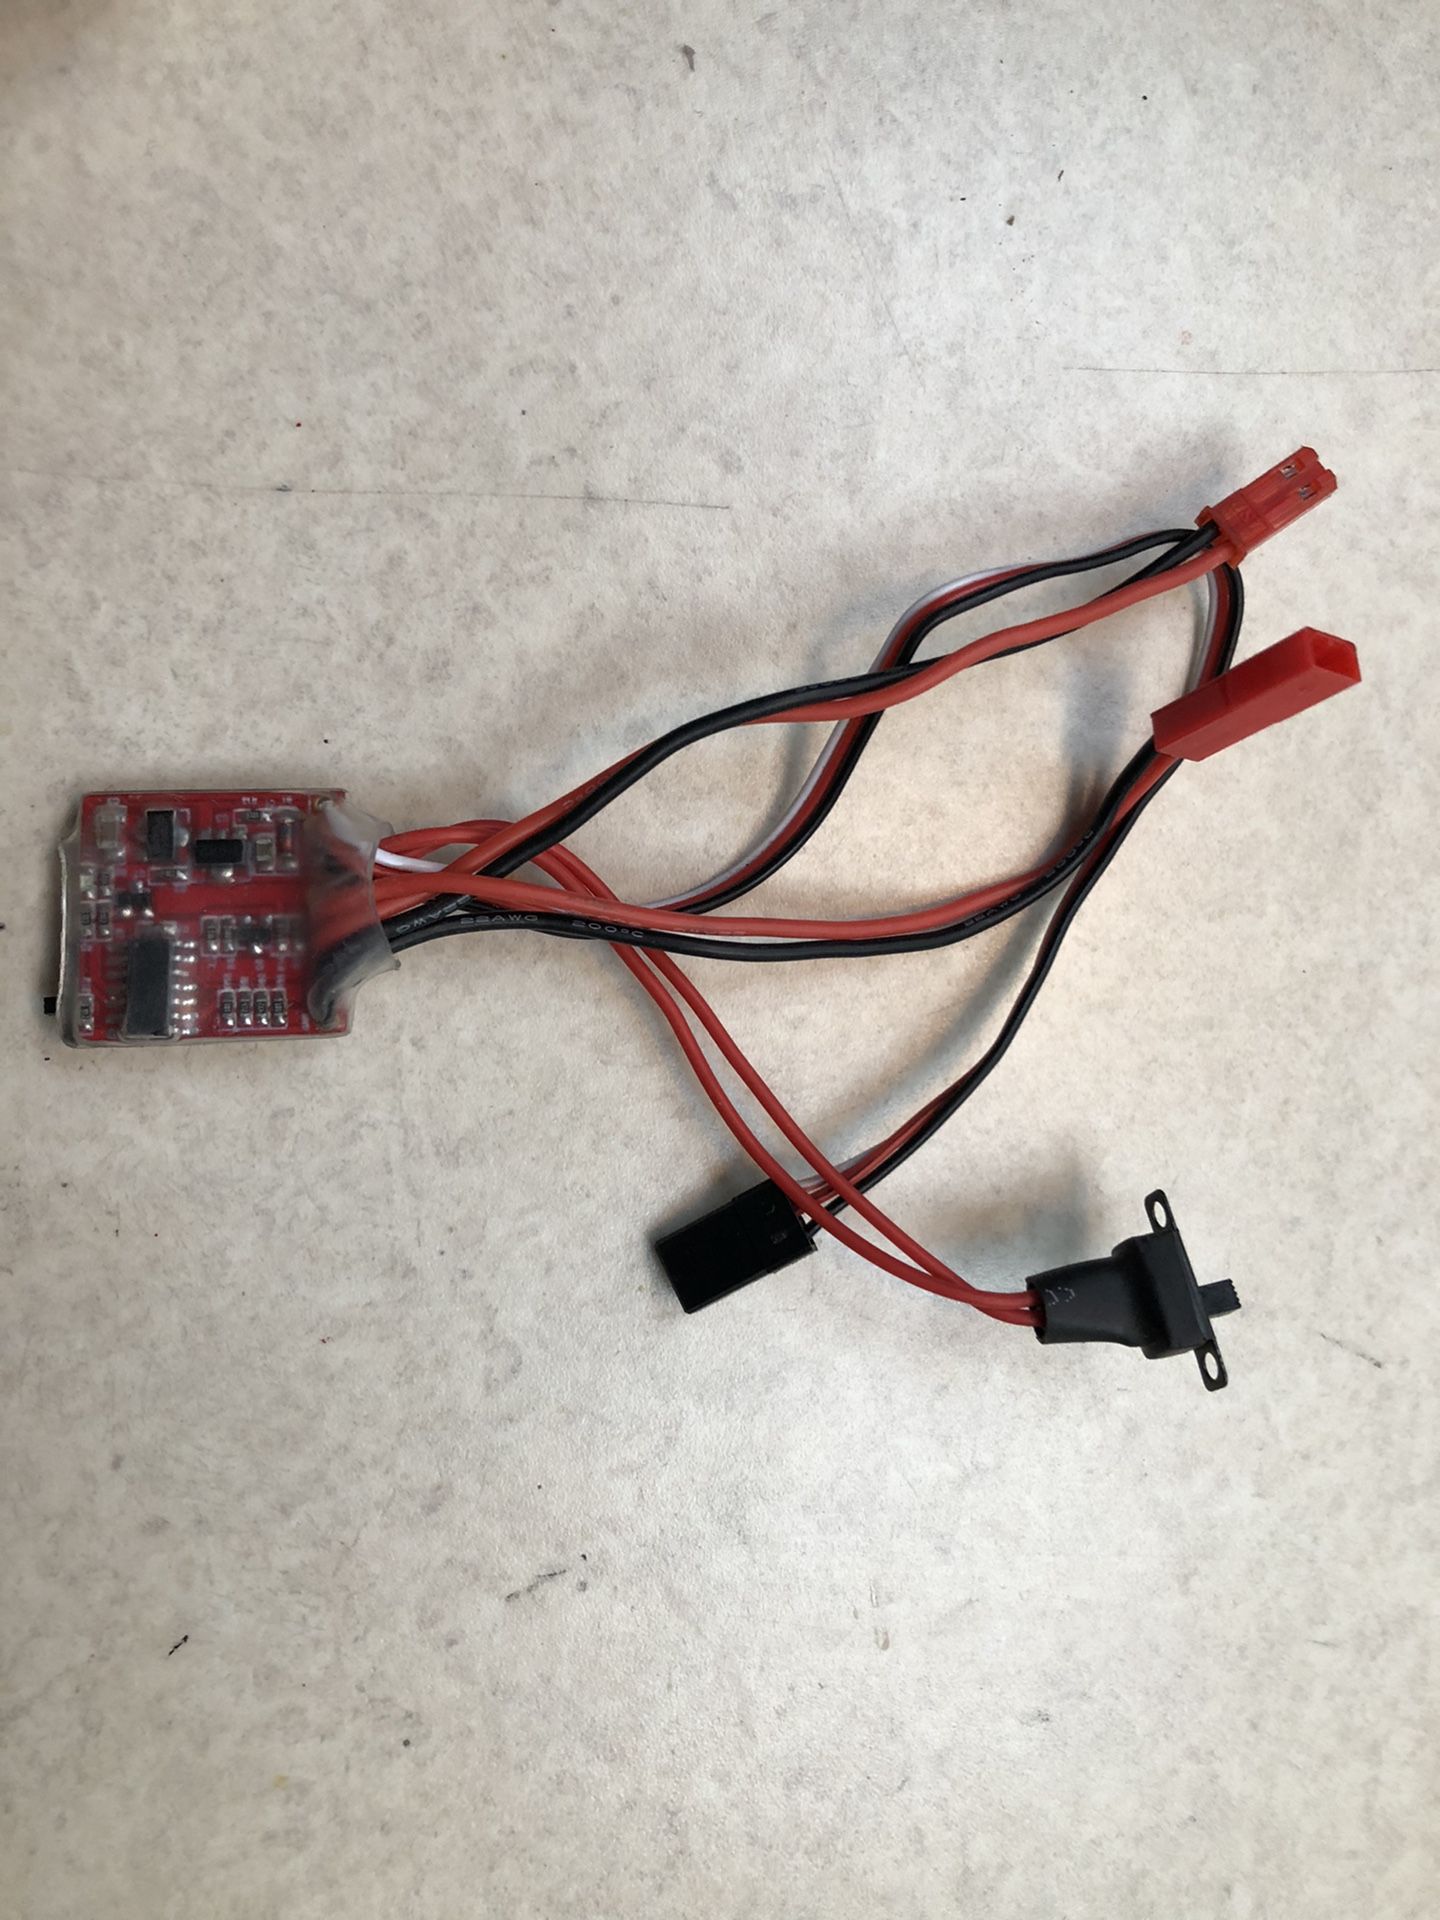 Rc winch controller connector